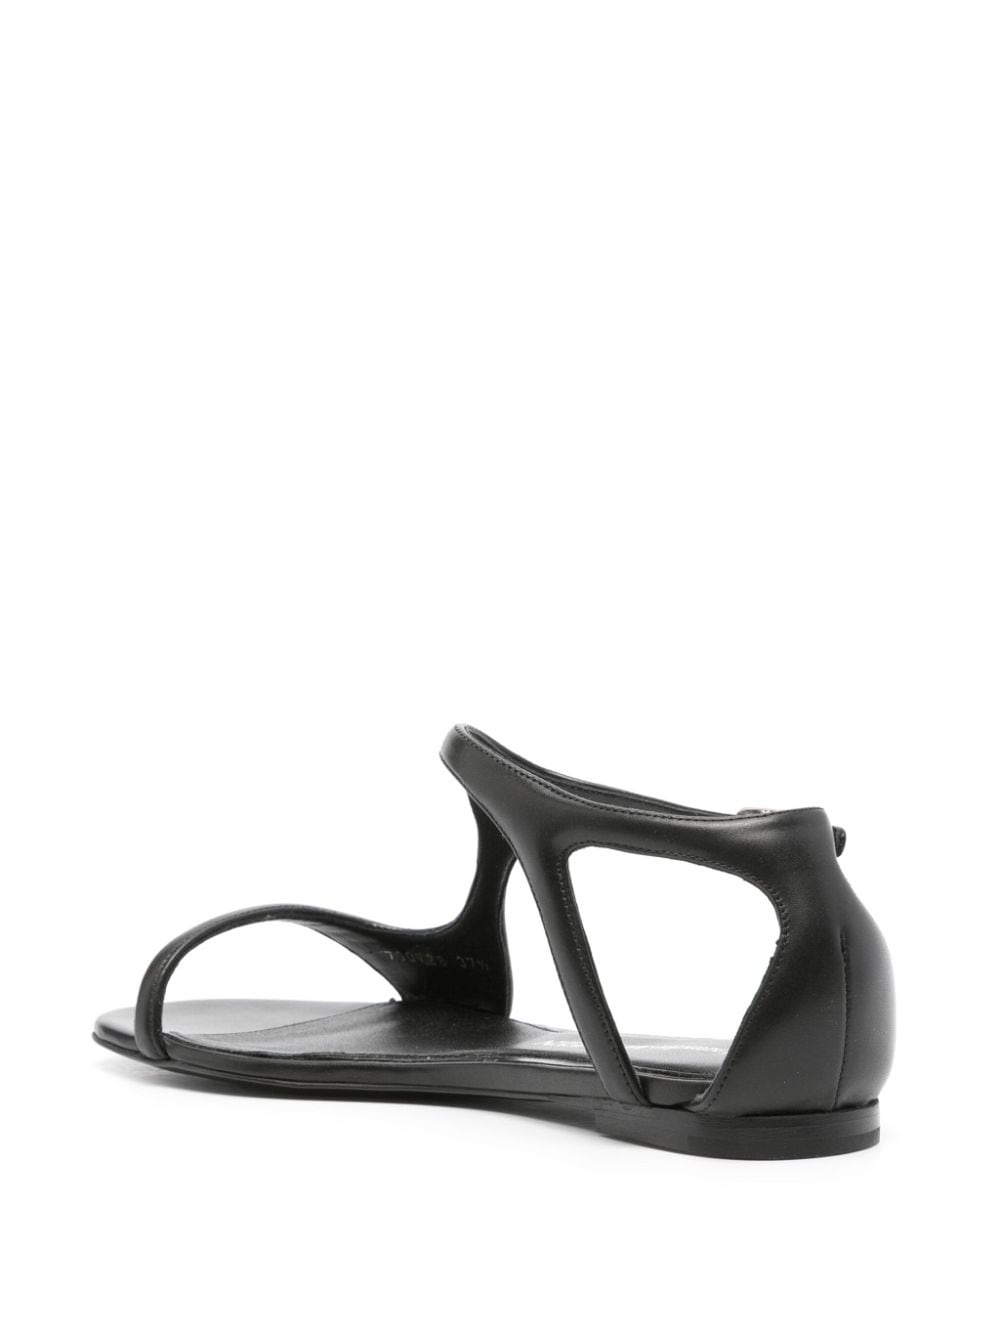 leather flat sandals - 3